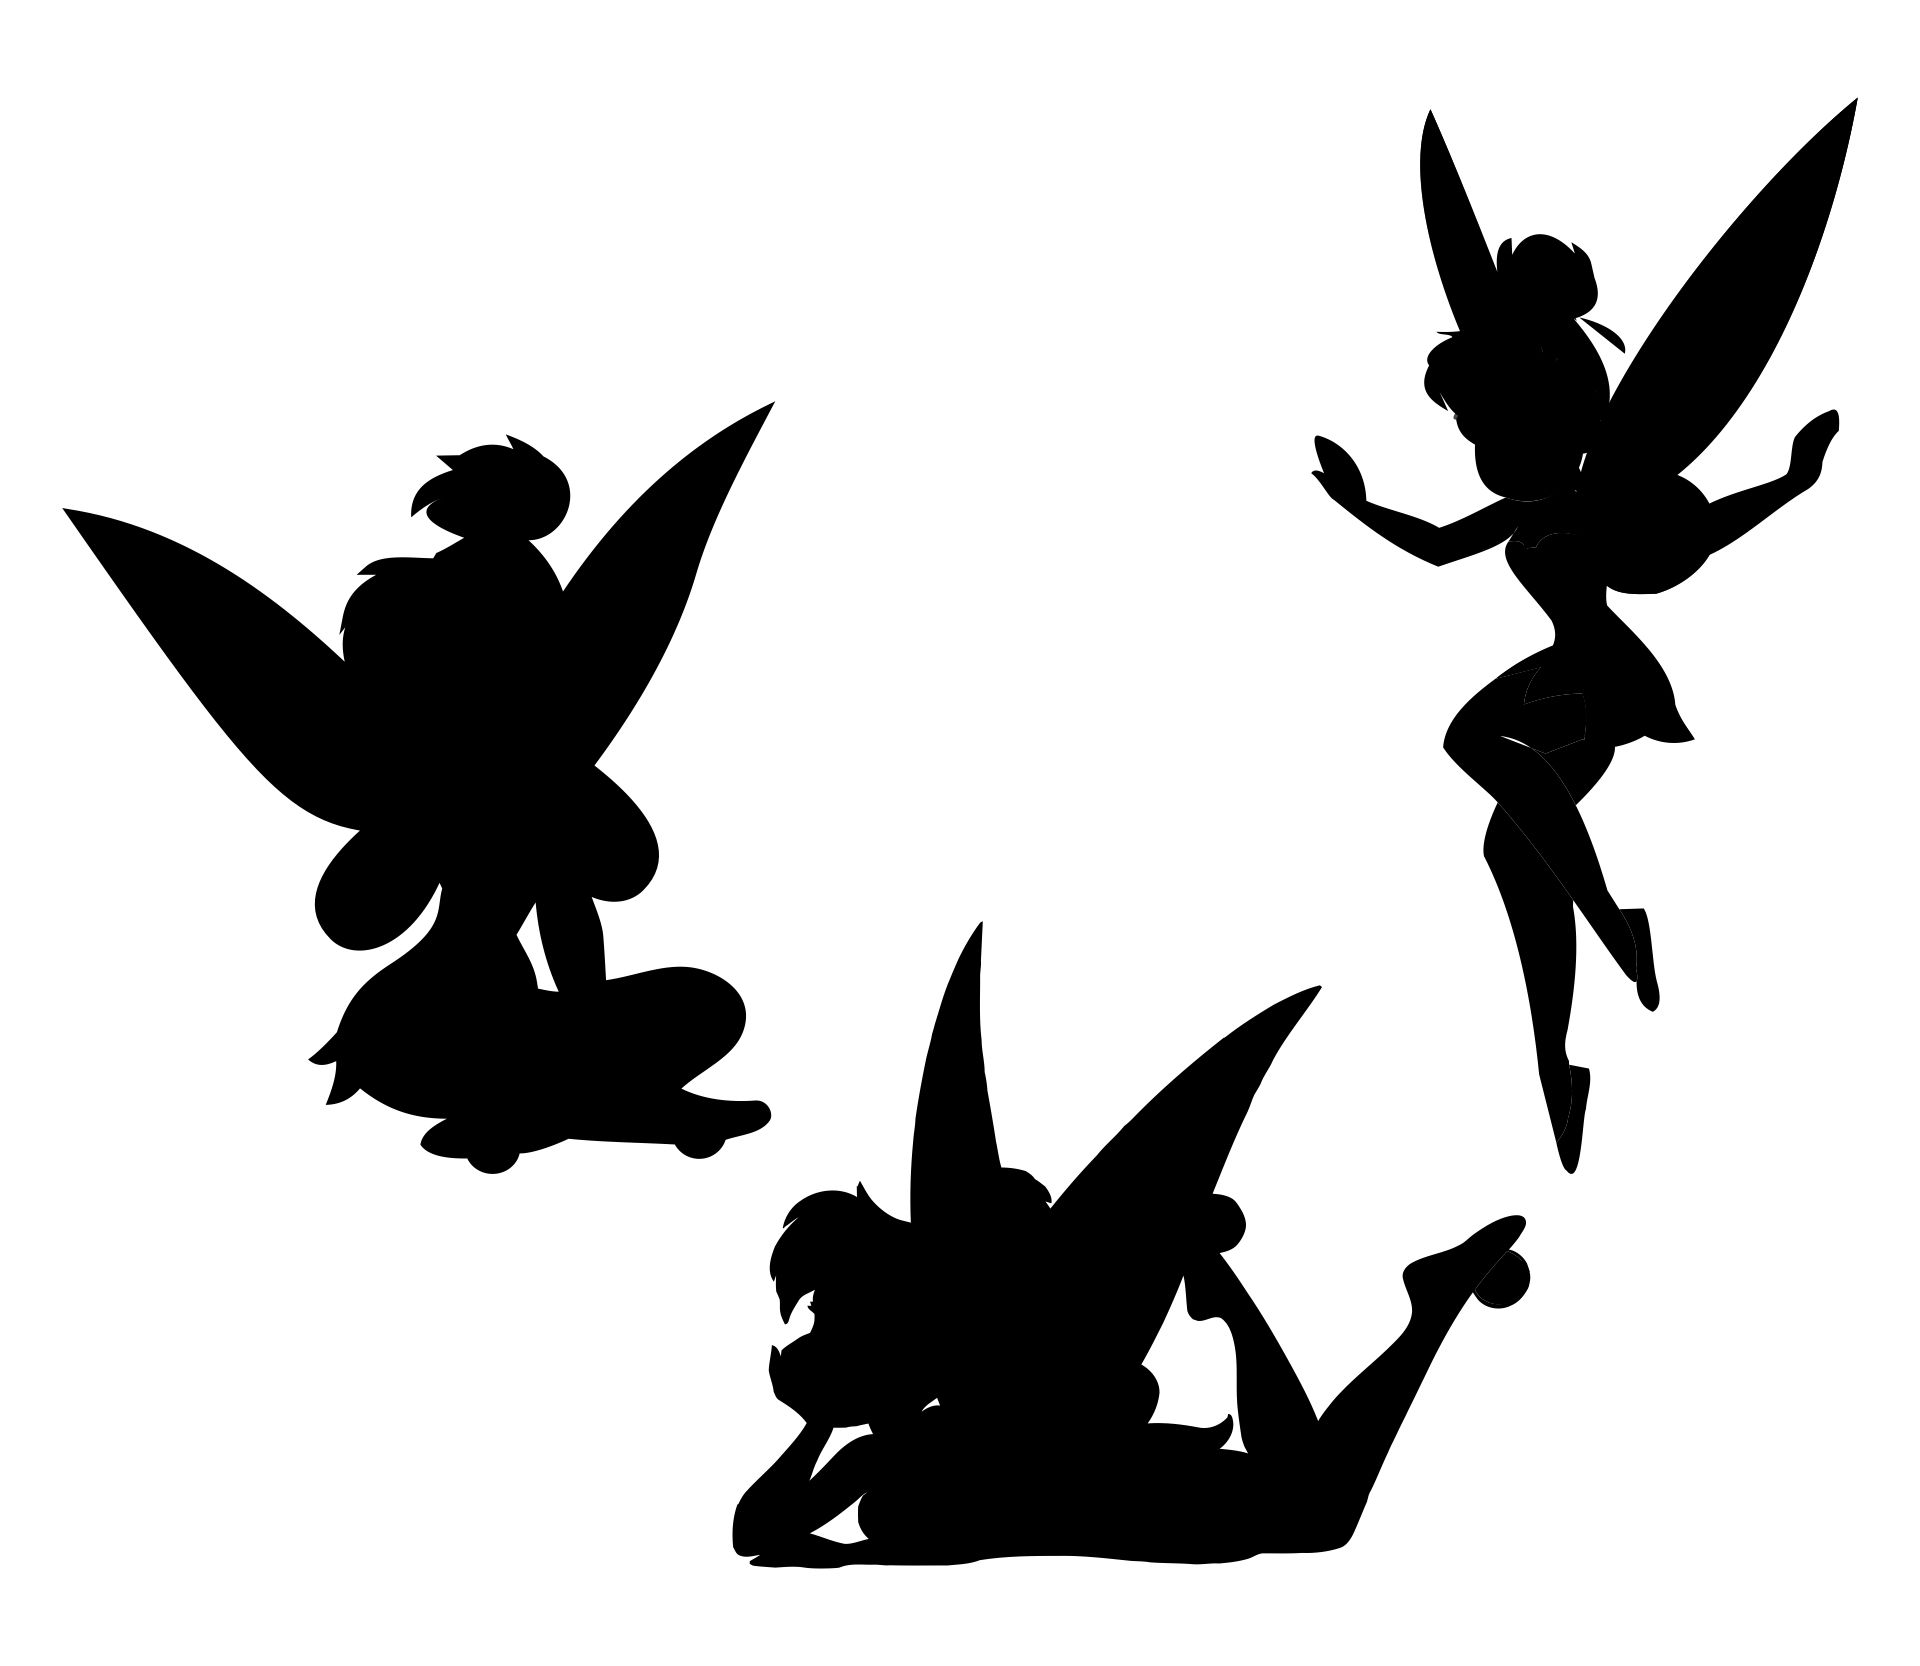 Download 9 Best Images of Printable Fairy Silhouette - Free Fairy ...